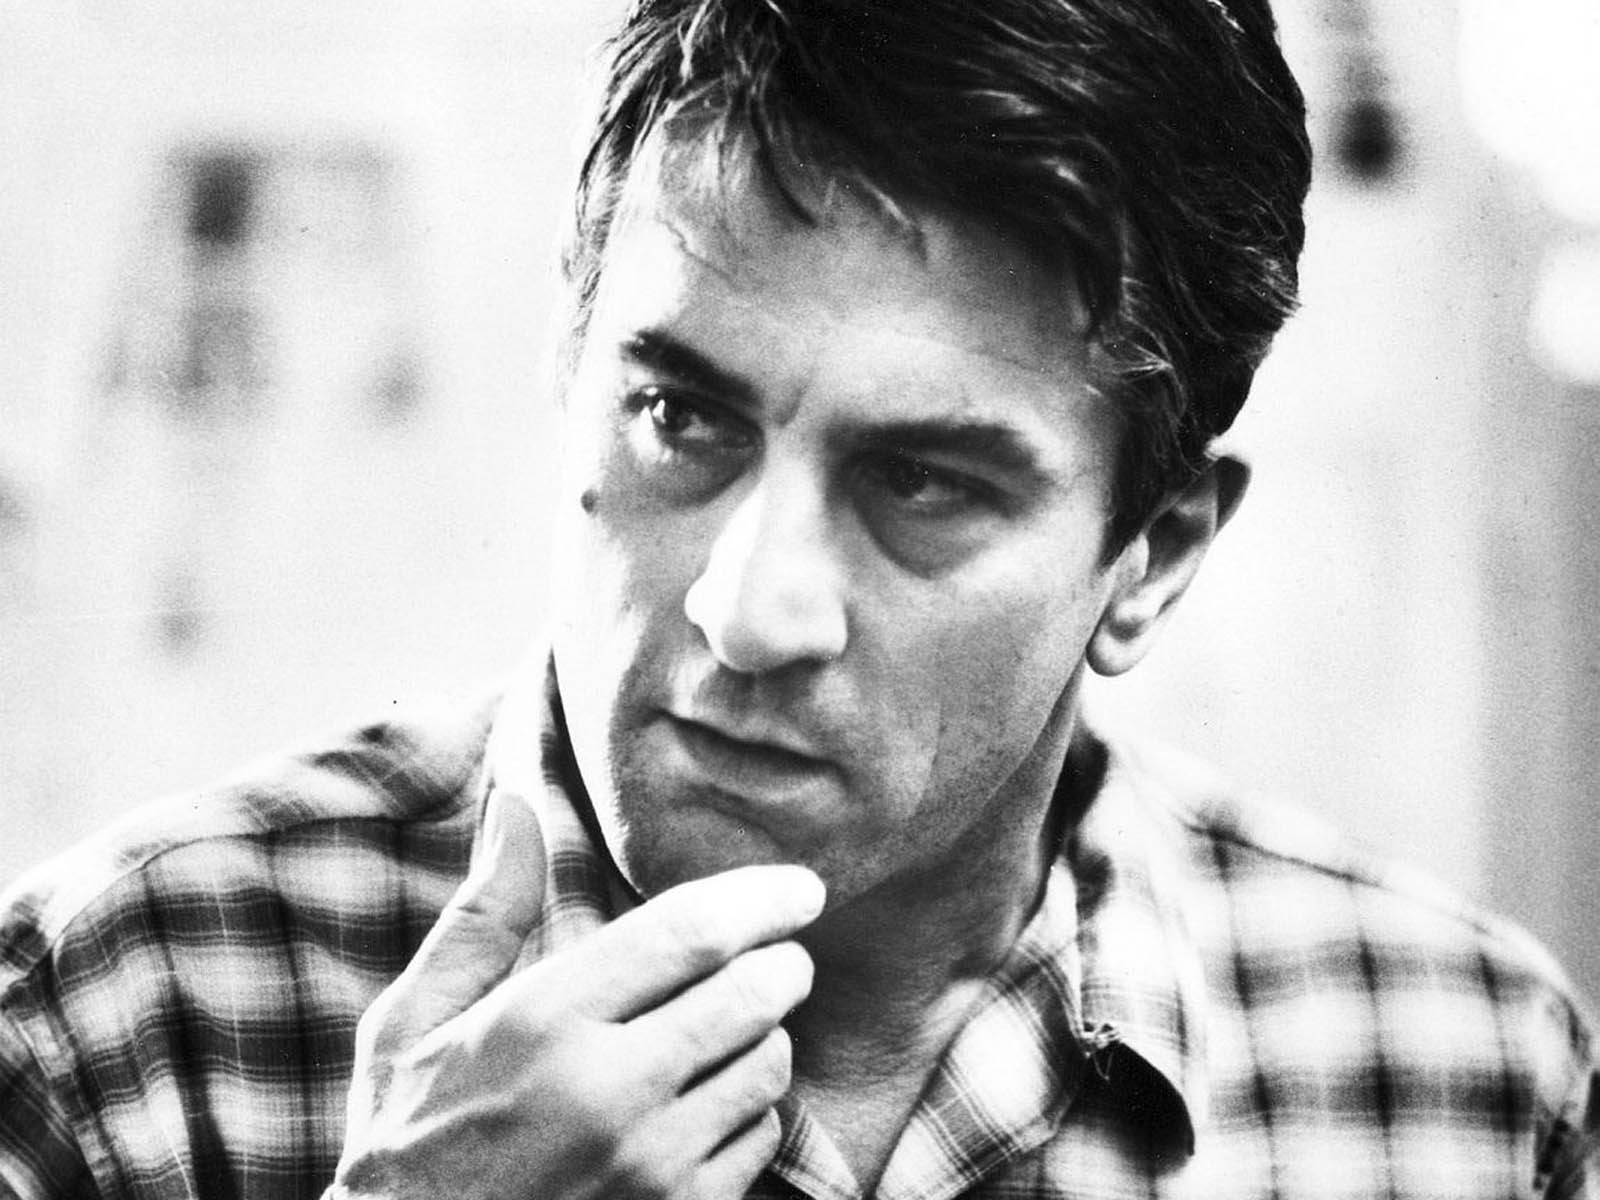 Robert De Niro Wallpapers High Resolution and Quality Download